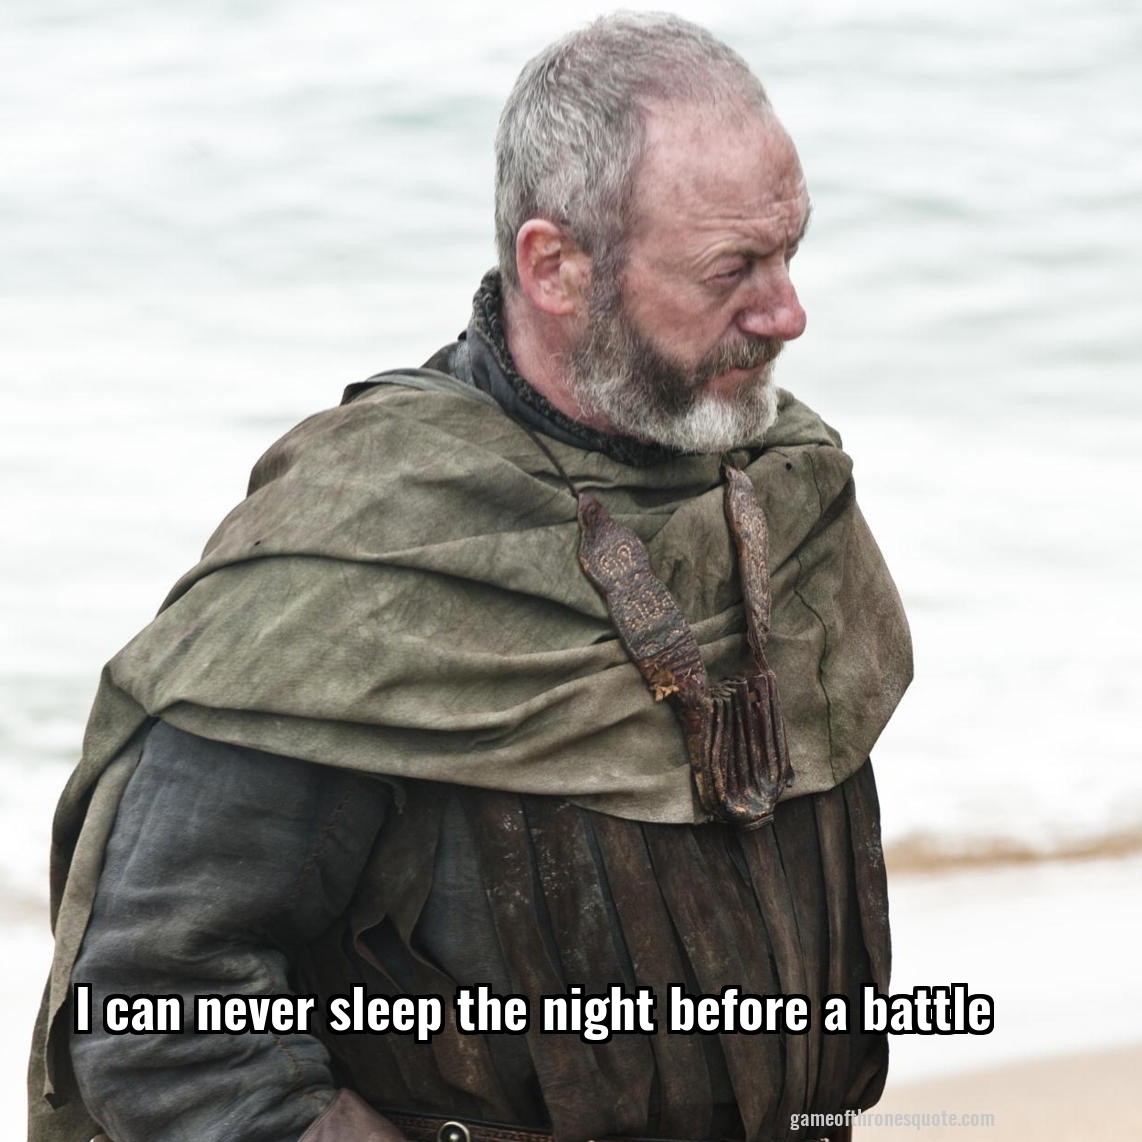 I can never sleep the night before a battle